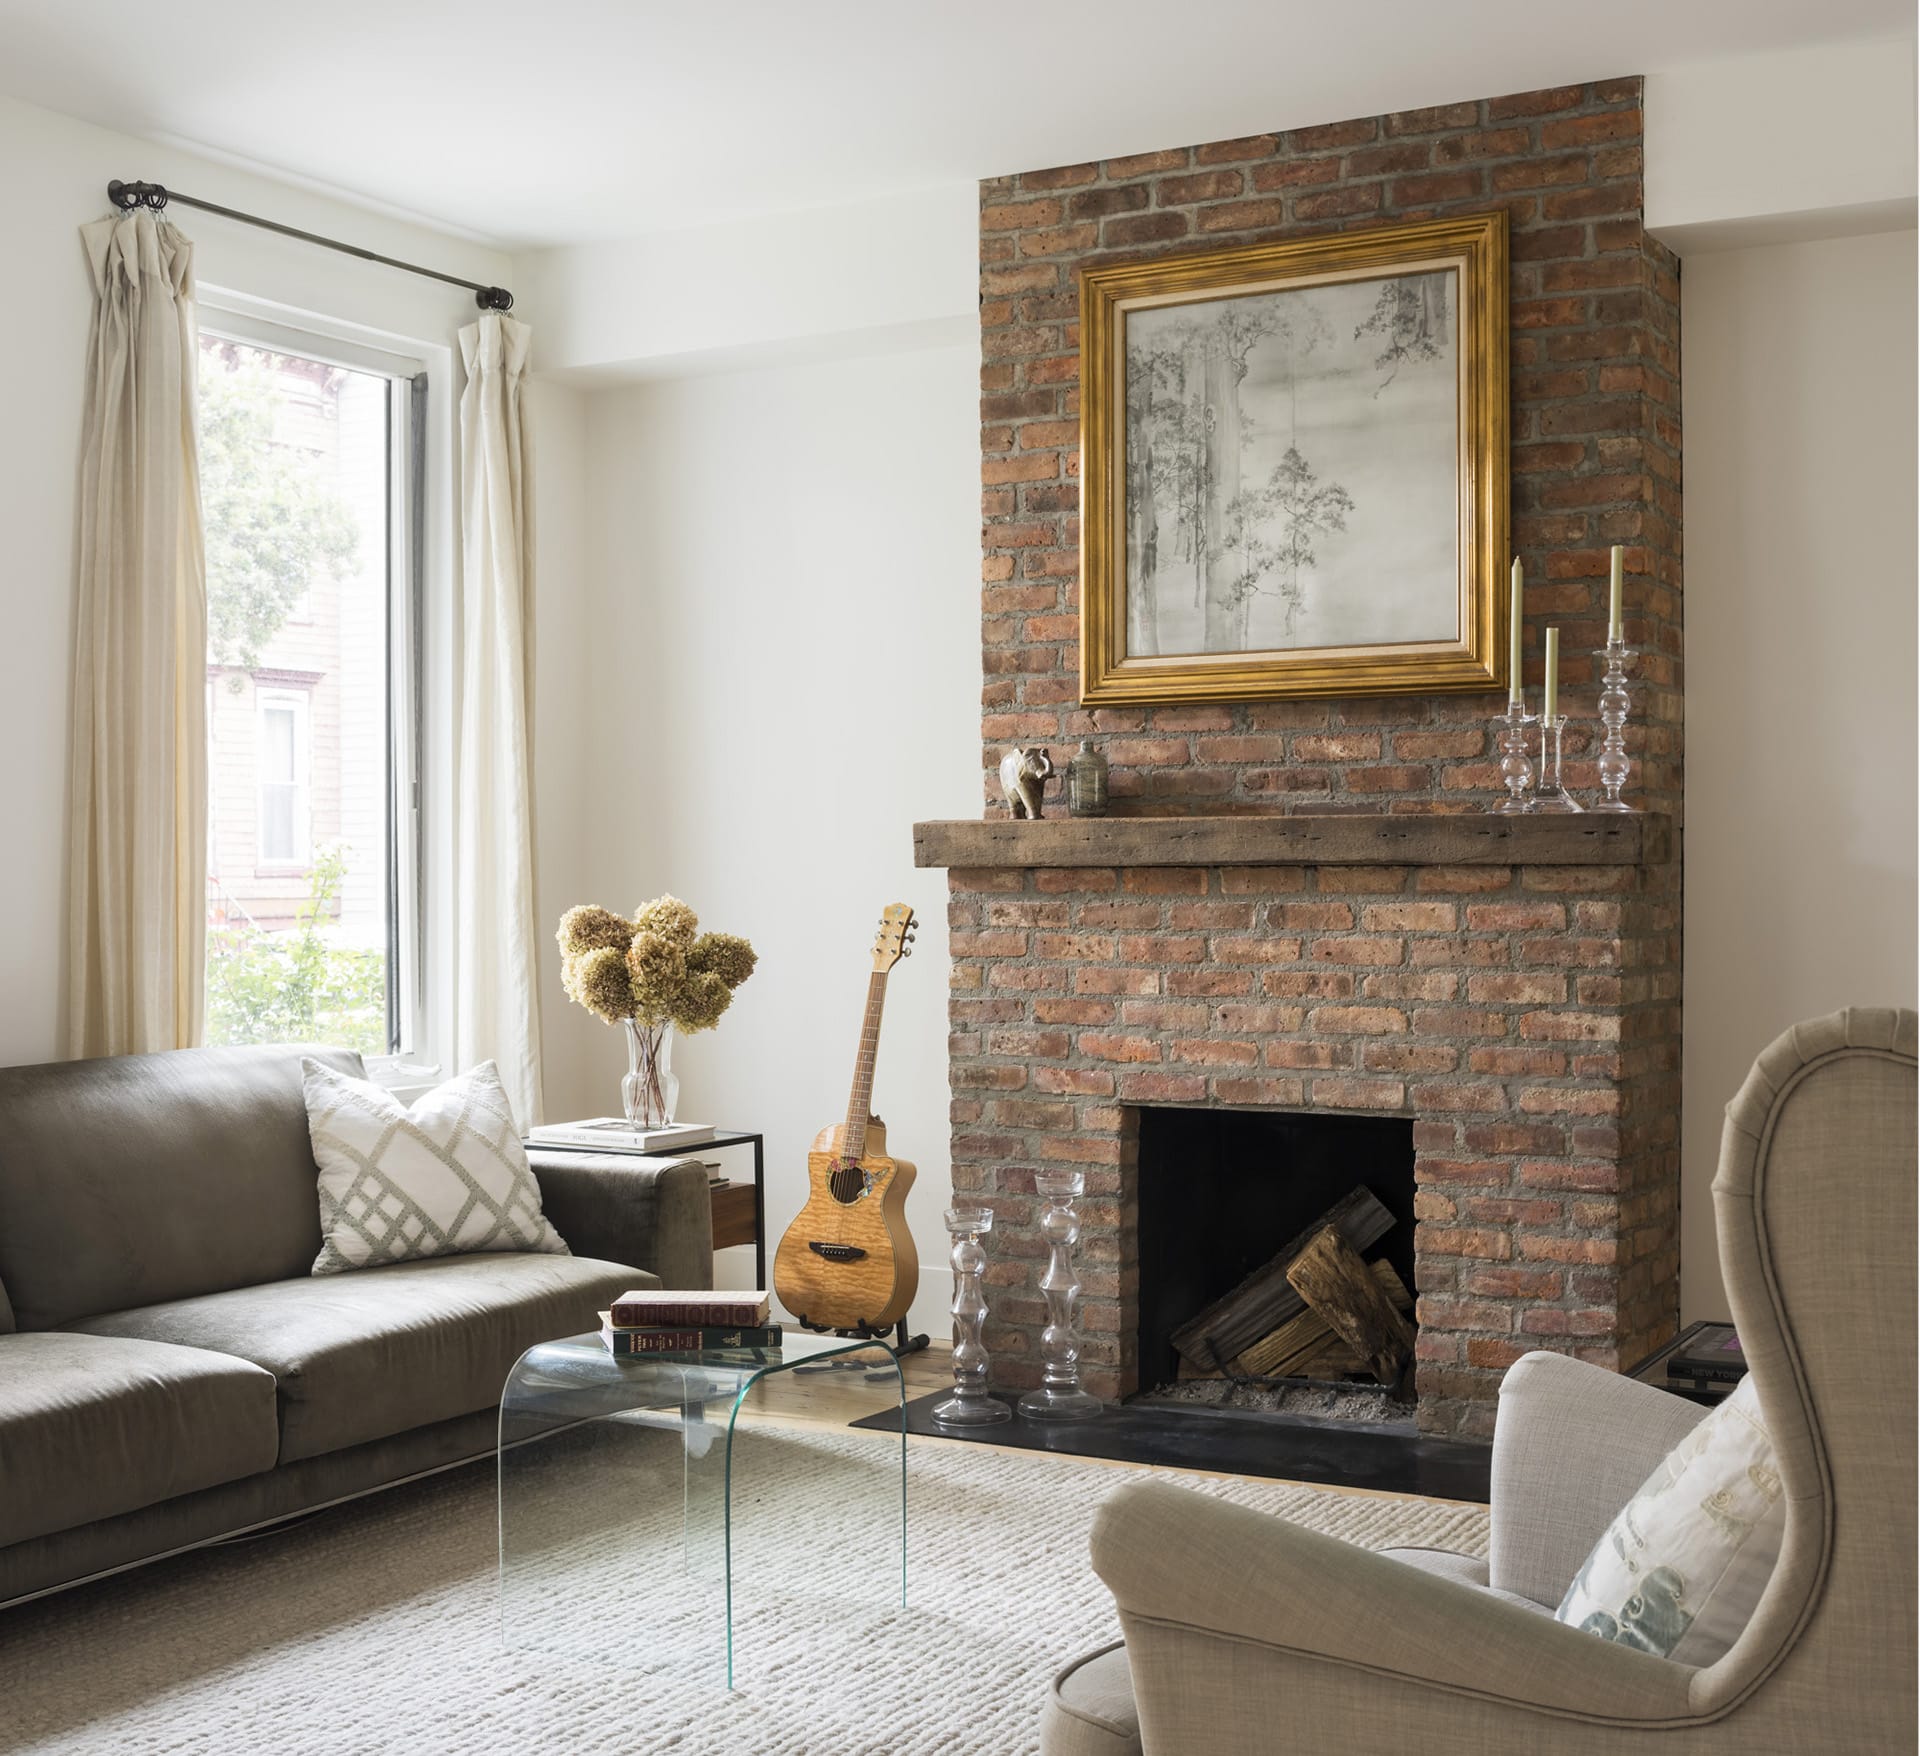 Living room in a Greenpoint townhouse with large brick fireplace, acoustic guitar, carpeted floors, and large window